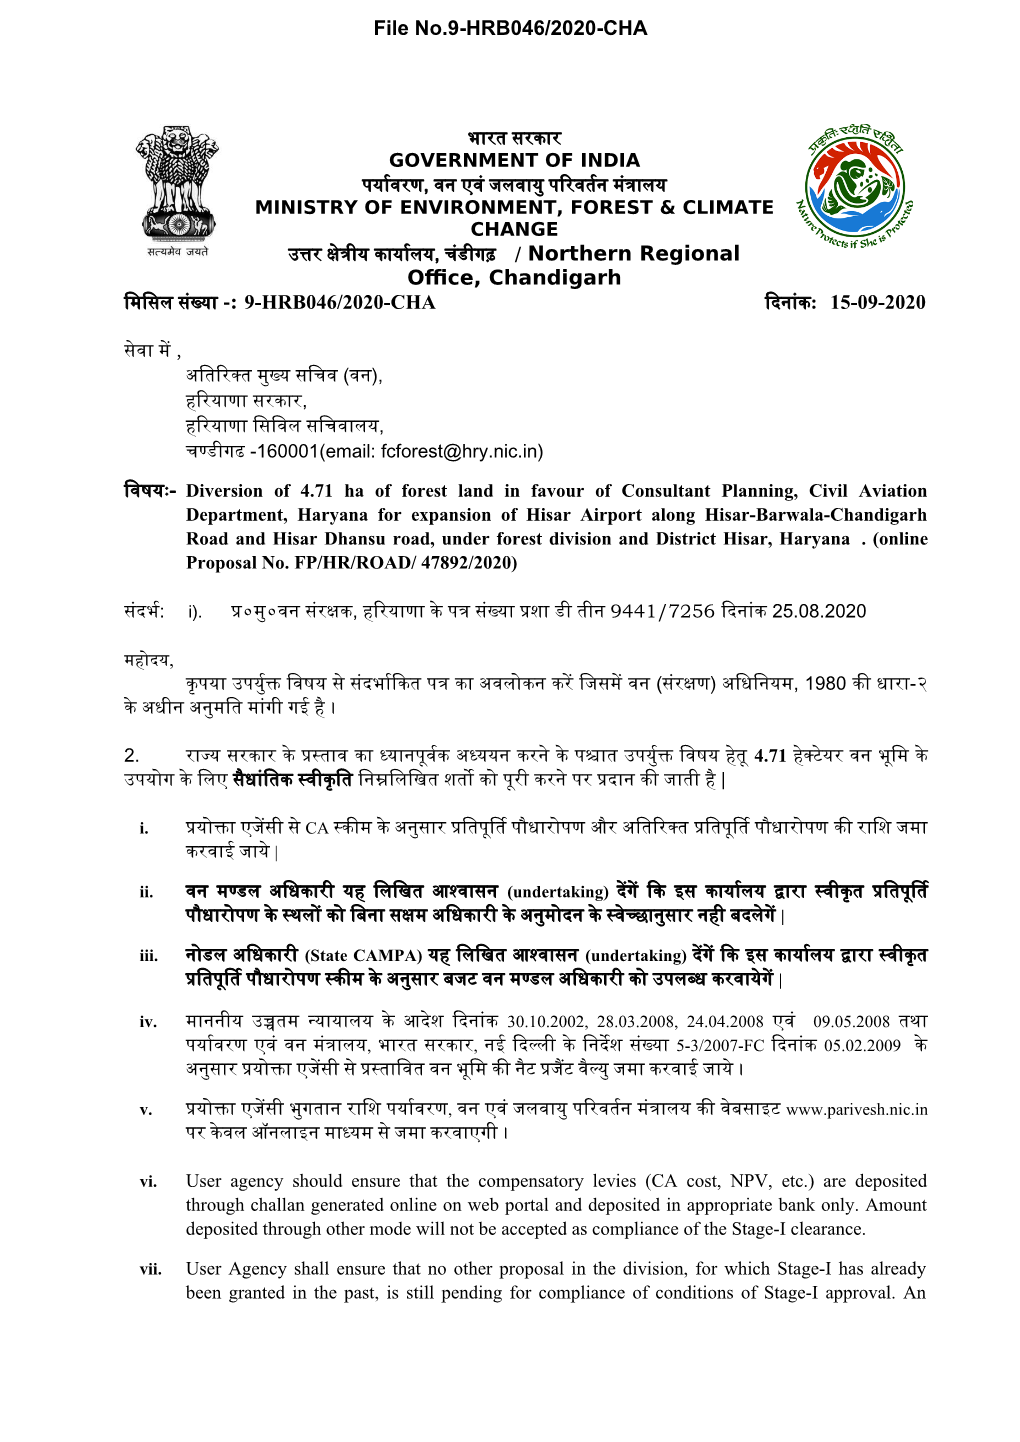 Office, Chandigarh File No.9-HRB046/2020-CHA